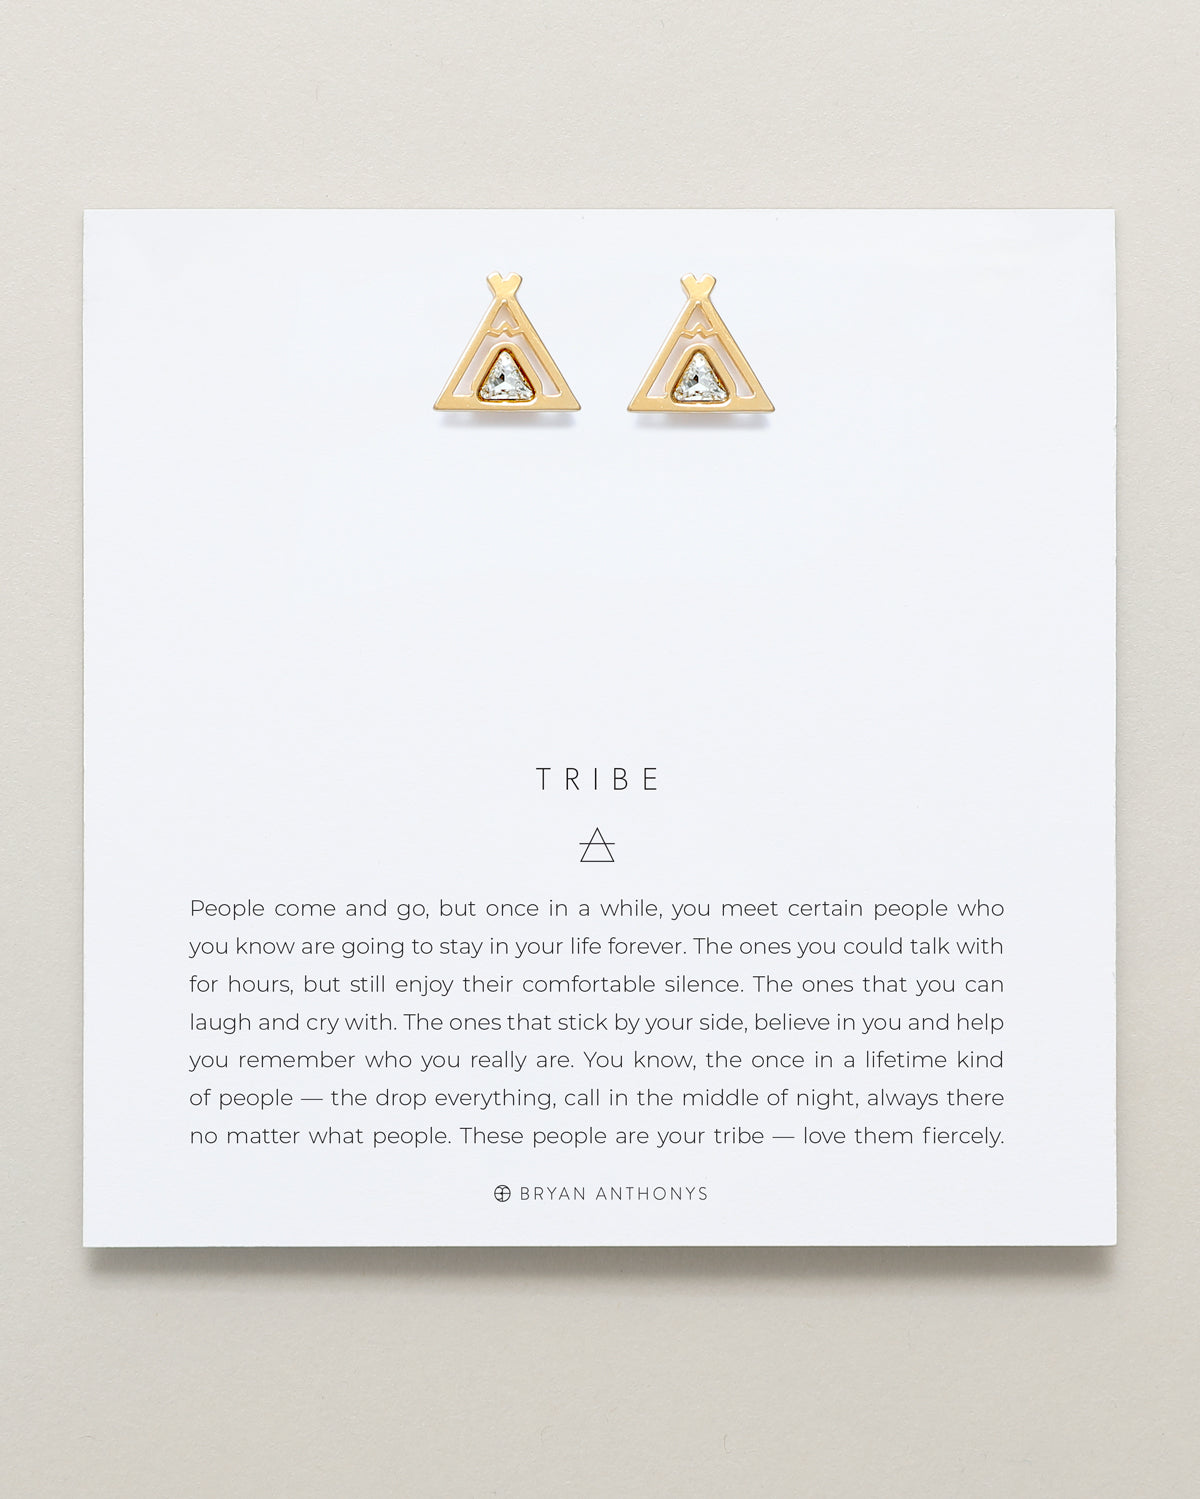 Bryan Anthonys Tribe Gold Earrings With Crystals On Card